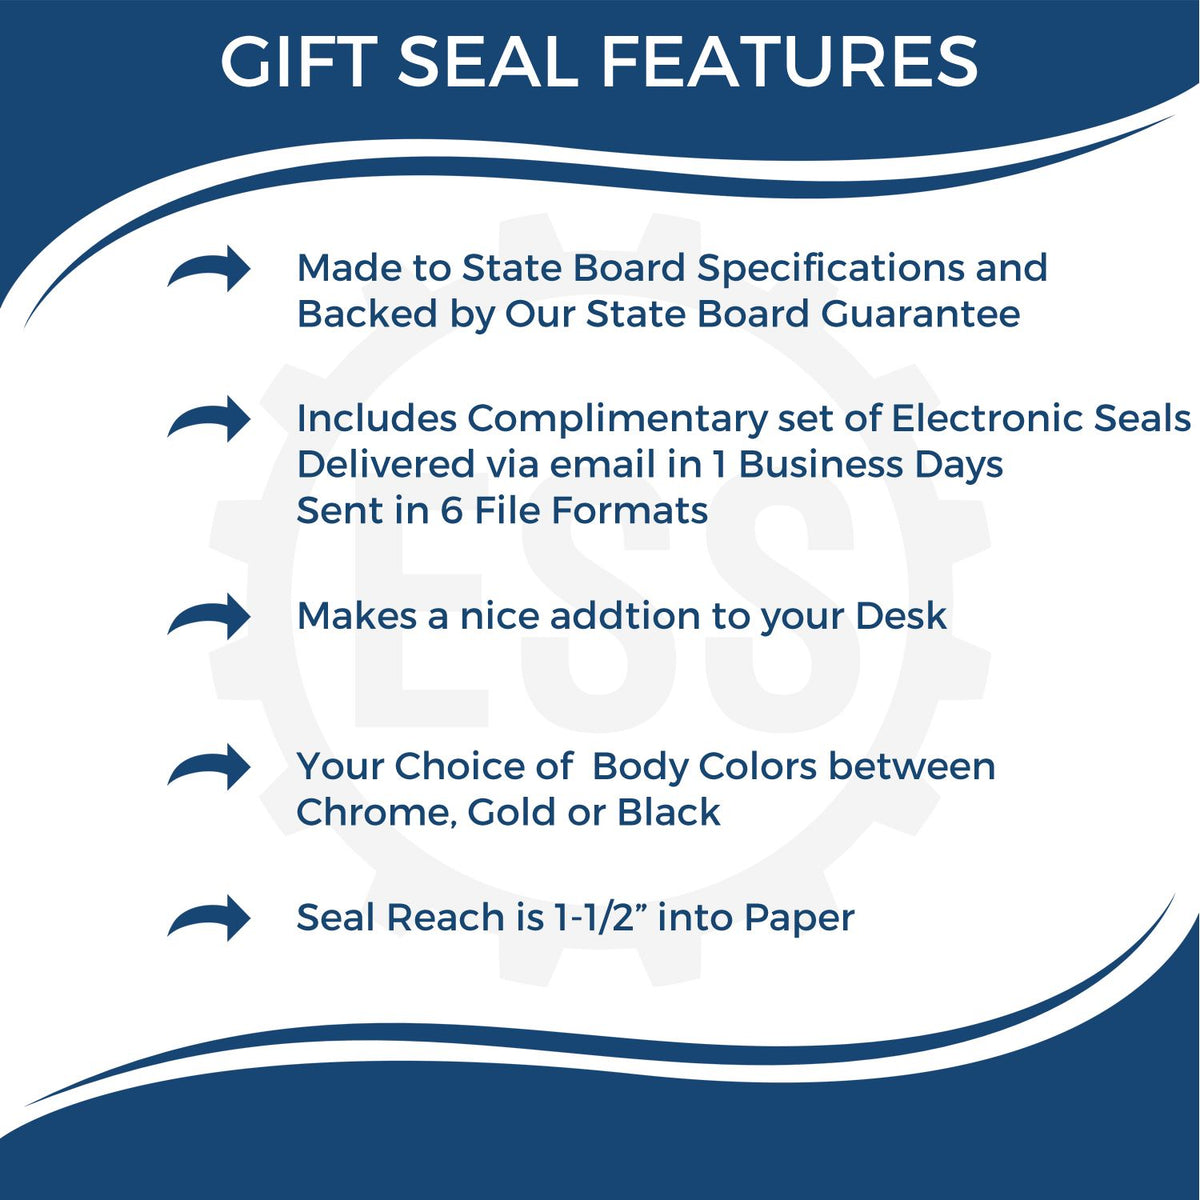 A picture of an infographic highlighting the selling points for the Gift Nevada Engineer Seal